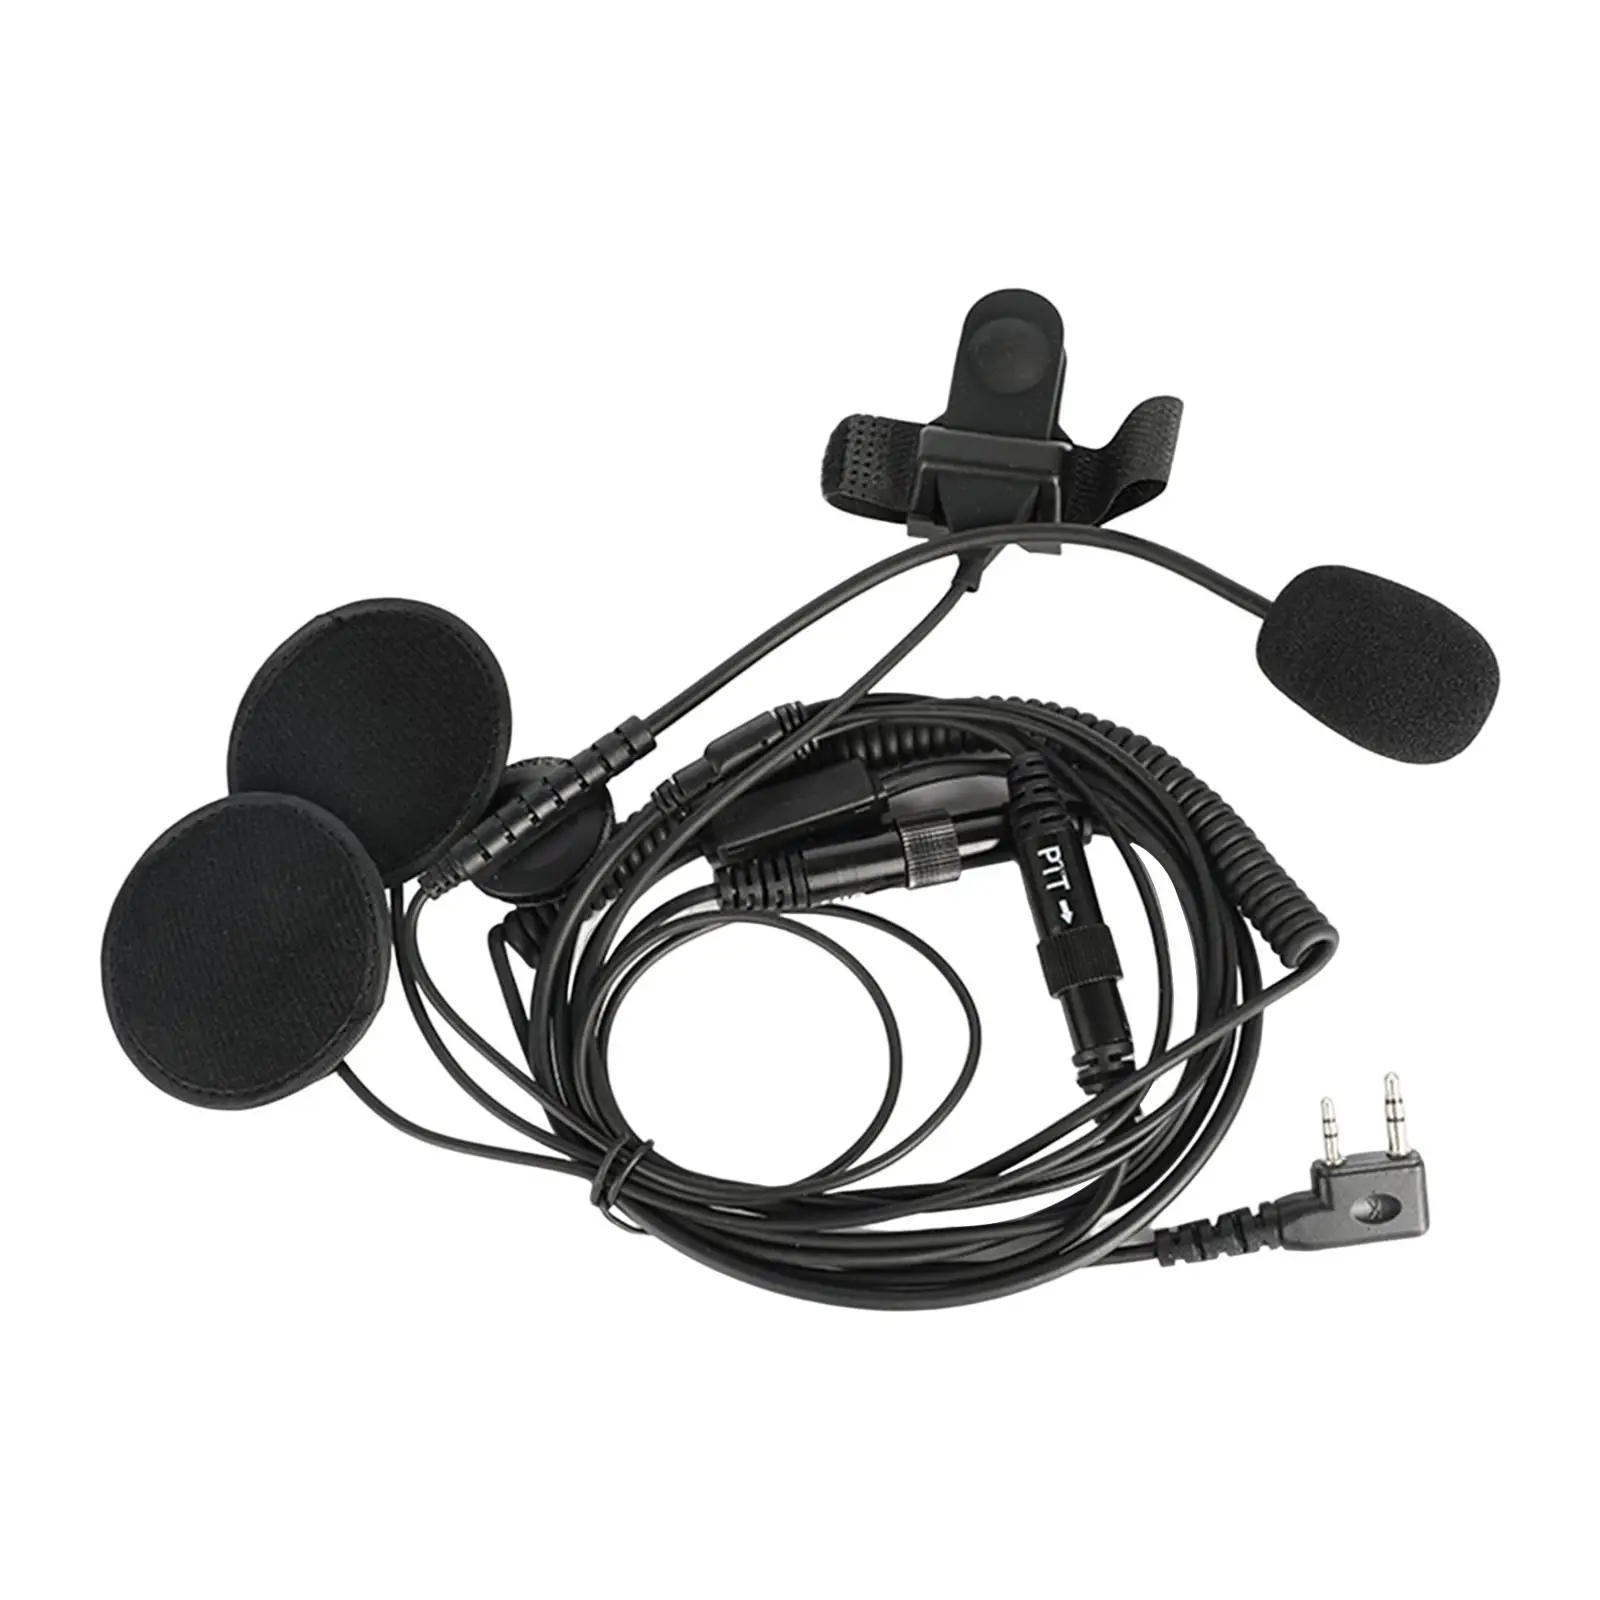 Two Headset Earpiece Cycling Headphones Outdoor with PMic